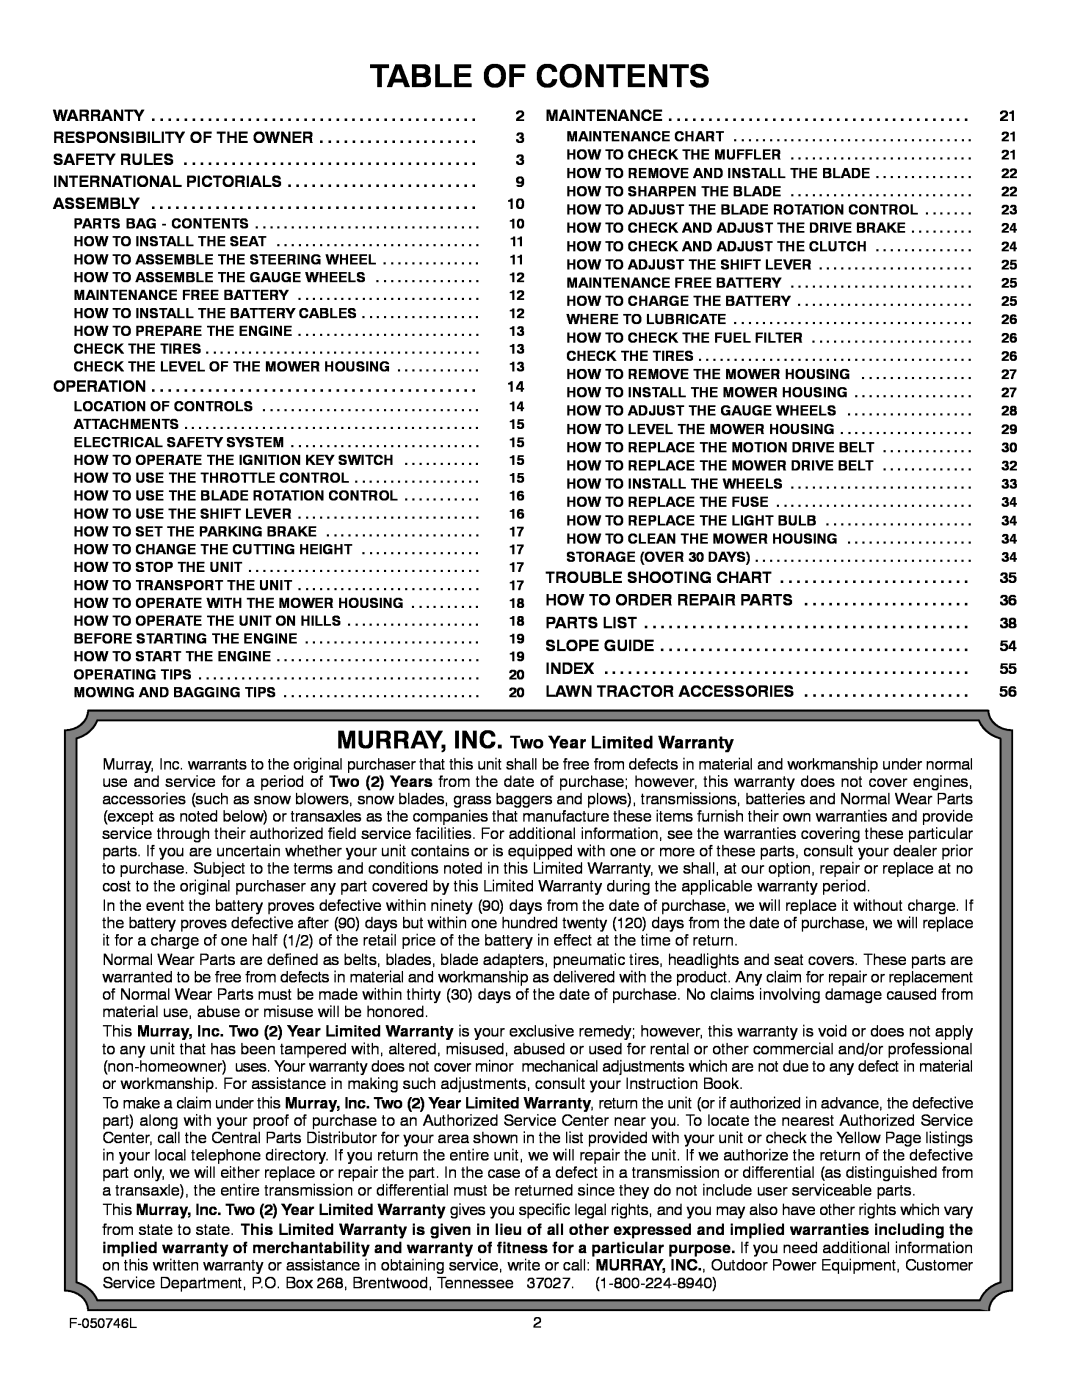 Murray 425016x48A manual Table Of Contents, MURRAY, INC. Two Year Limited Warranty 